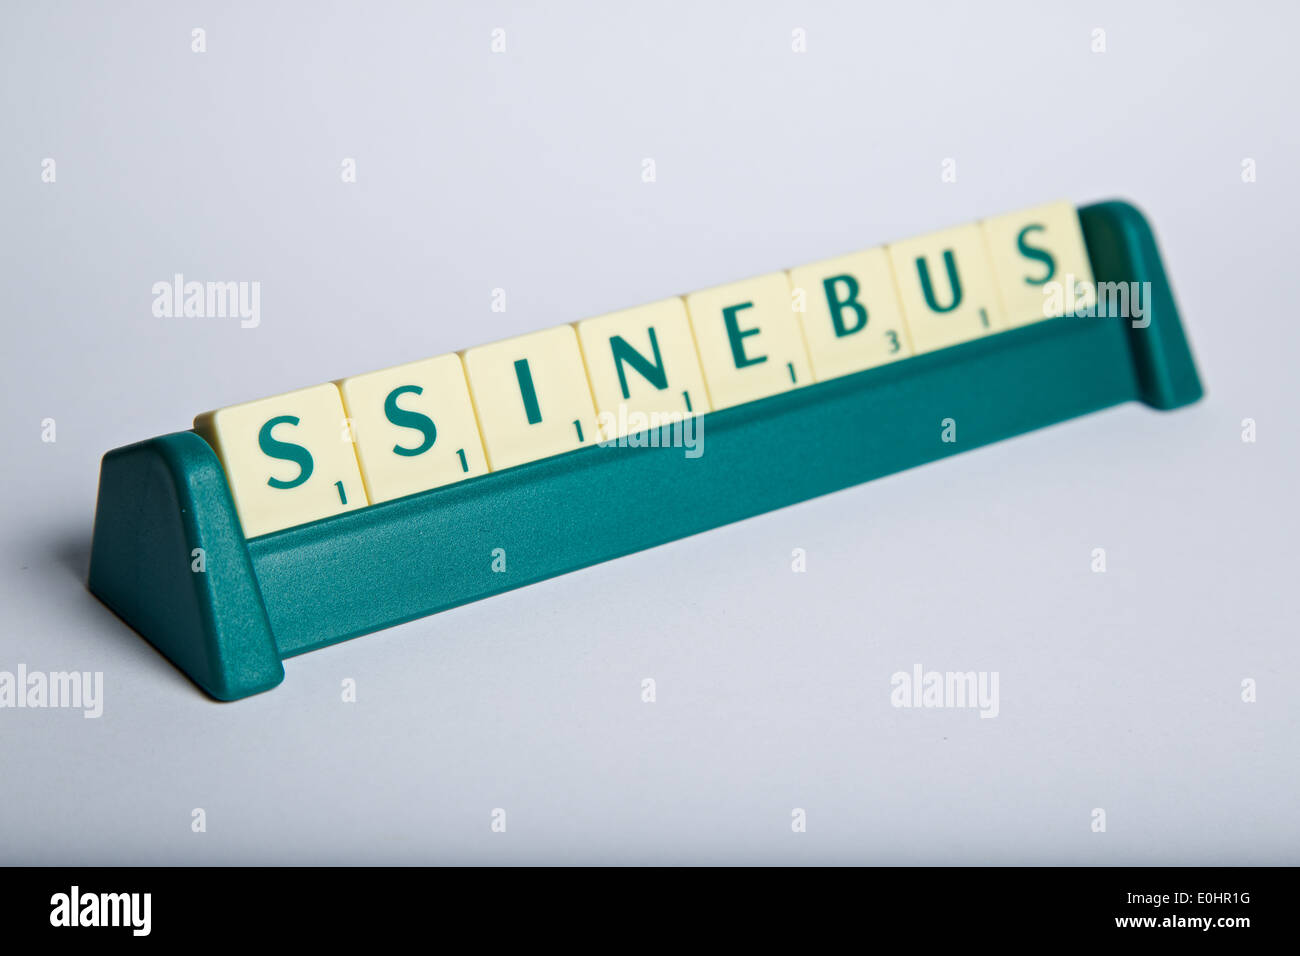 Scrabble tiles mixed up making the word business Stock Photo